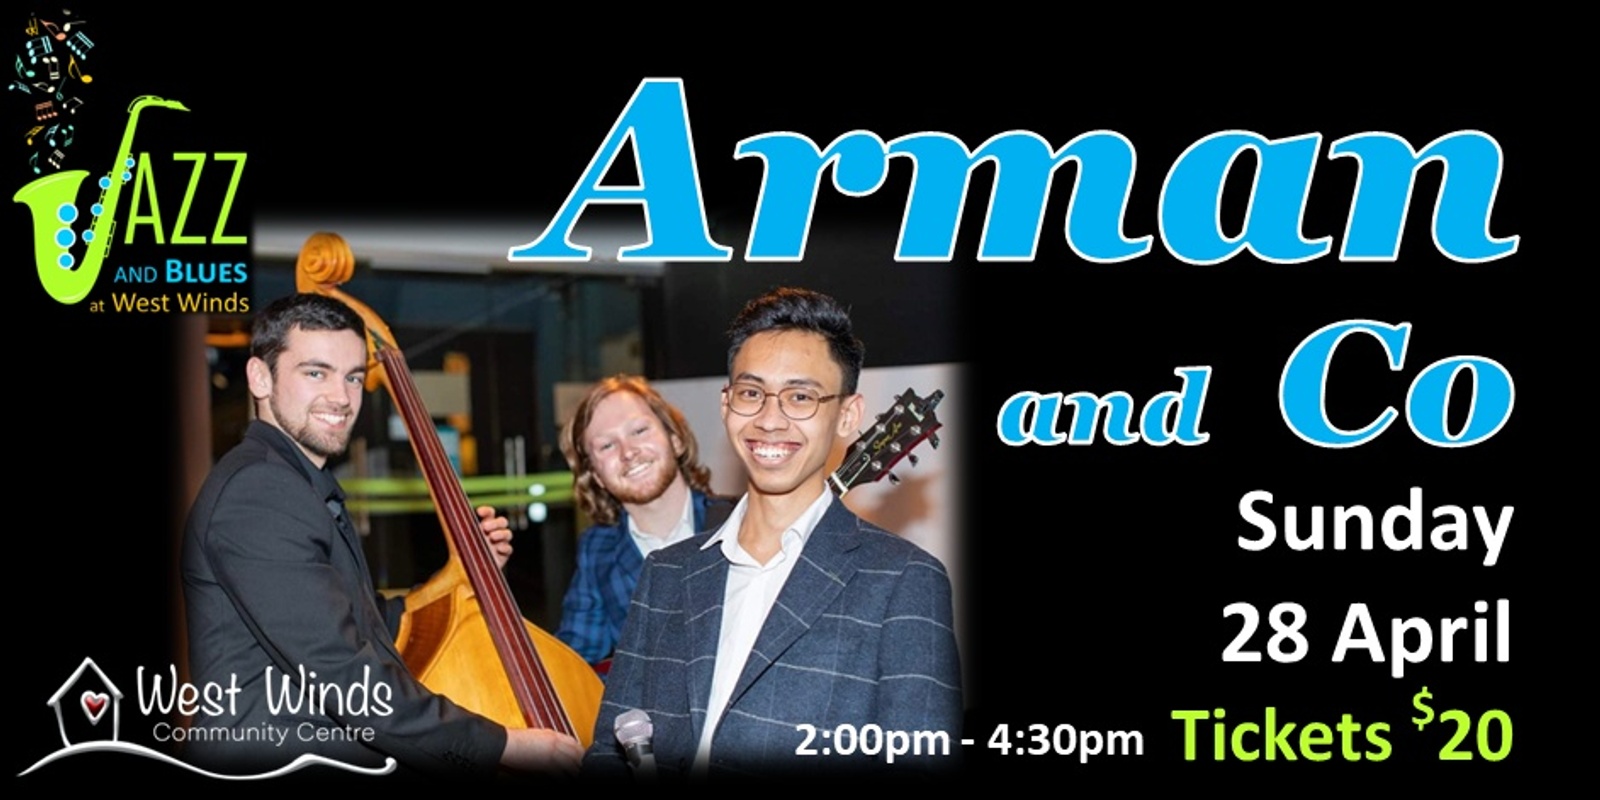 Banner image for Arman and Co play jazz at West Winds Community Centre